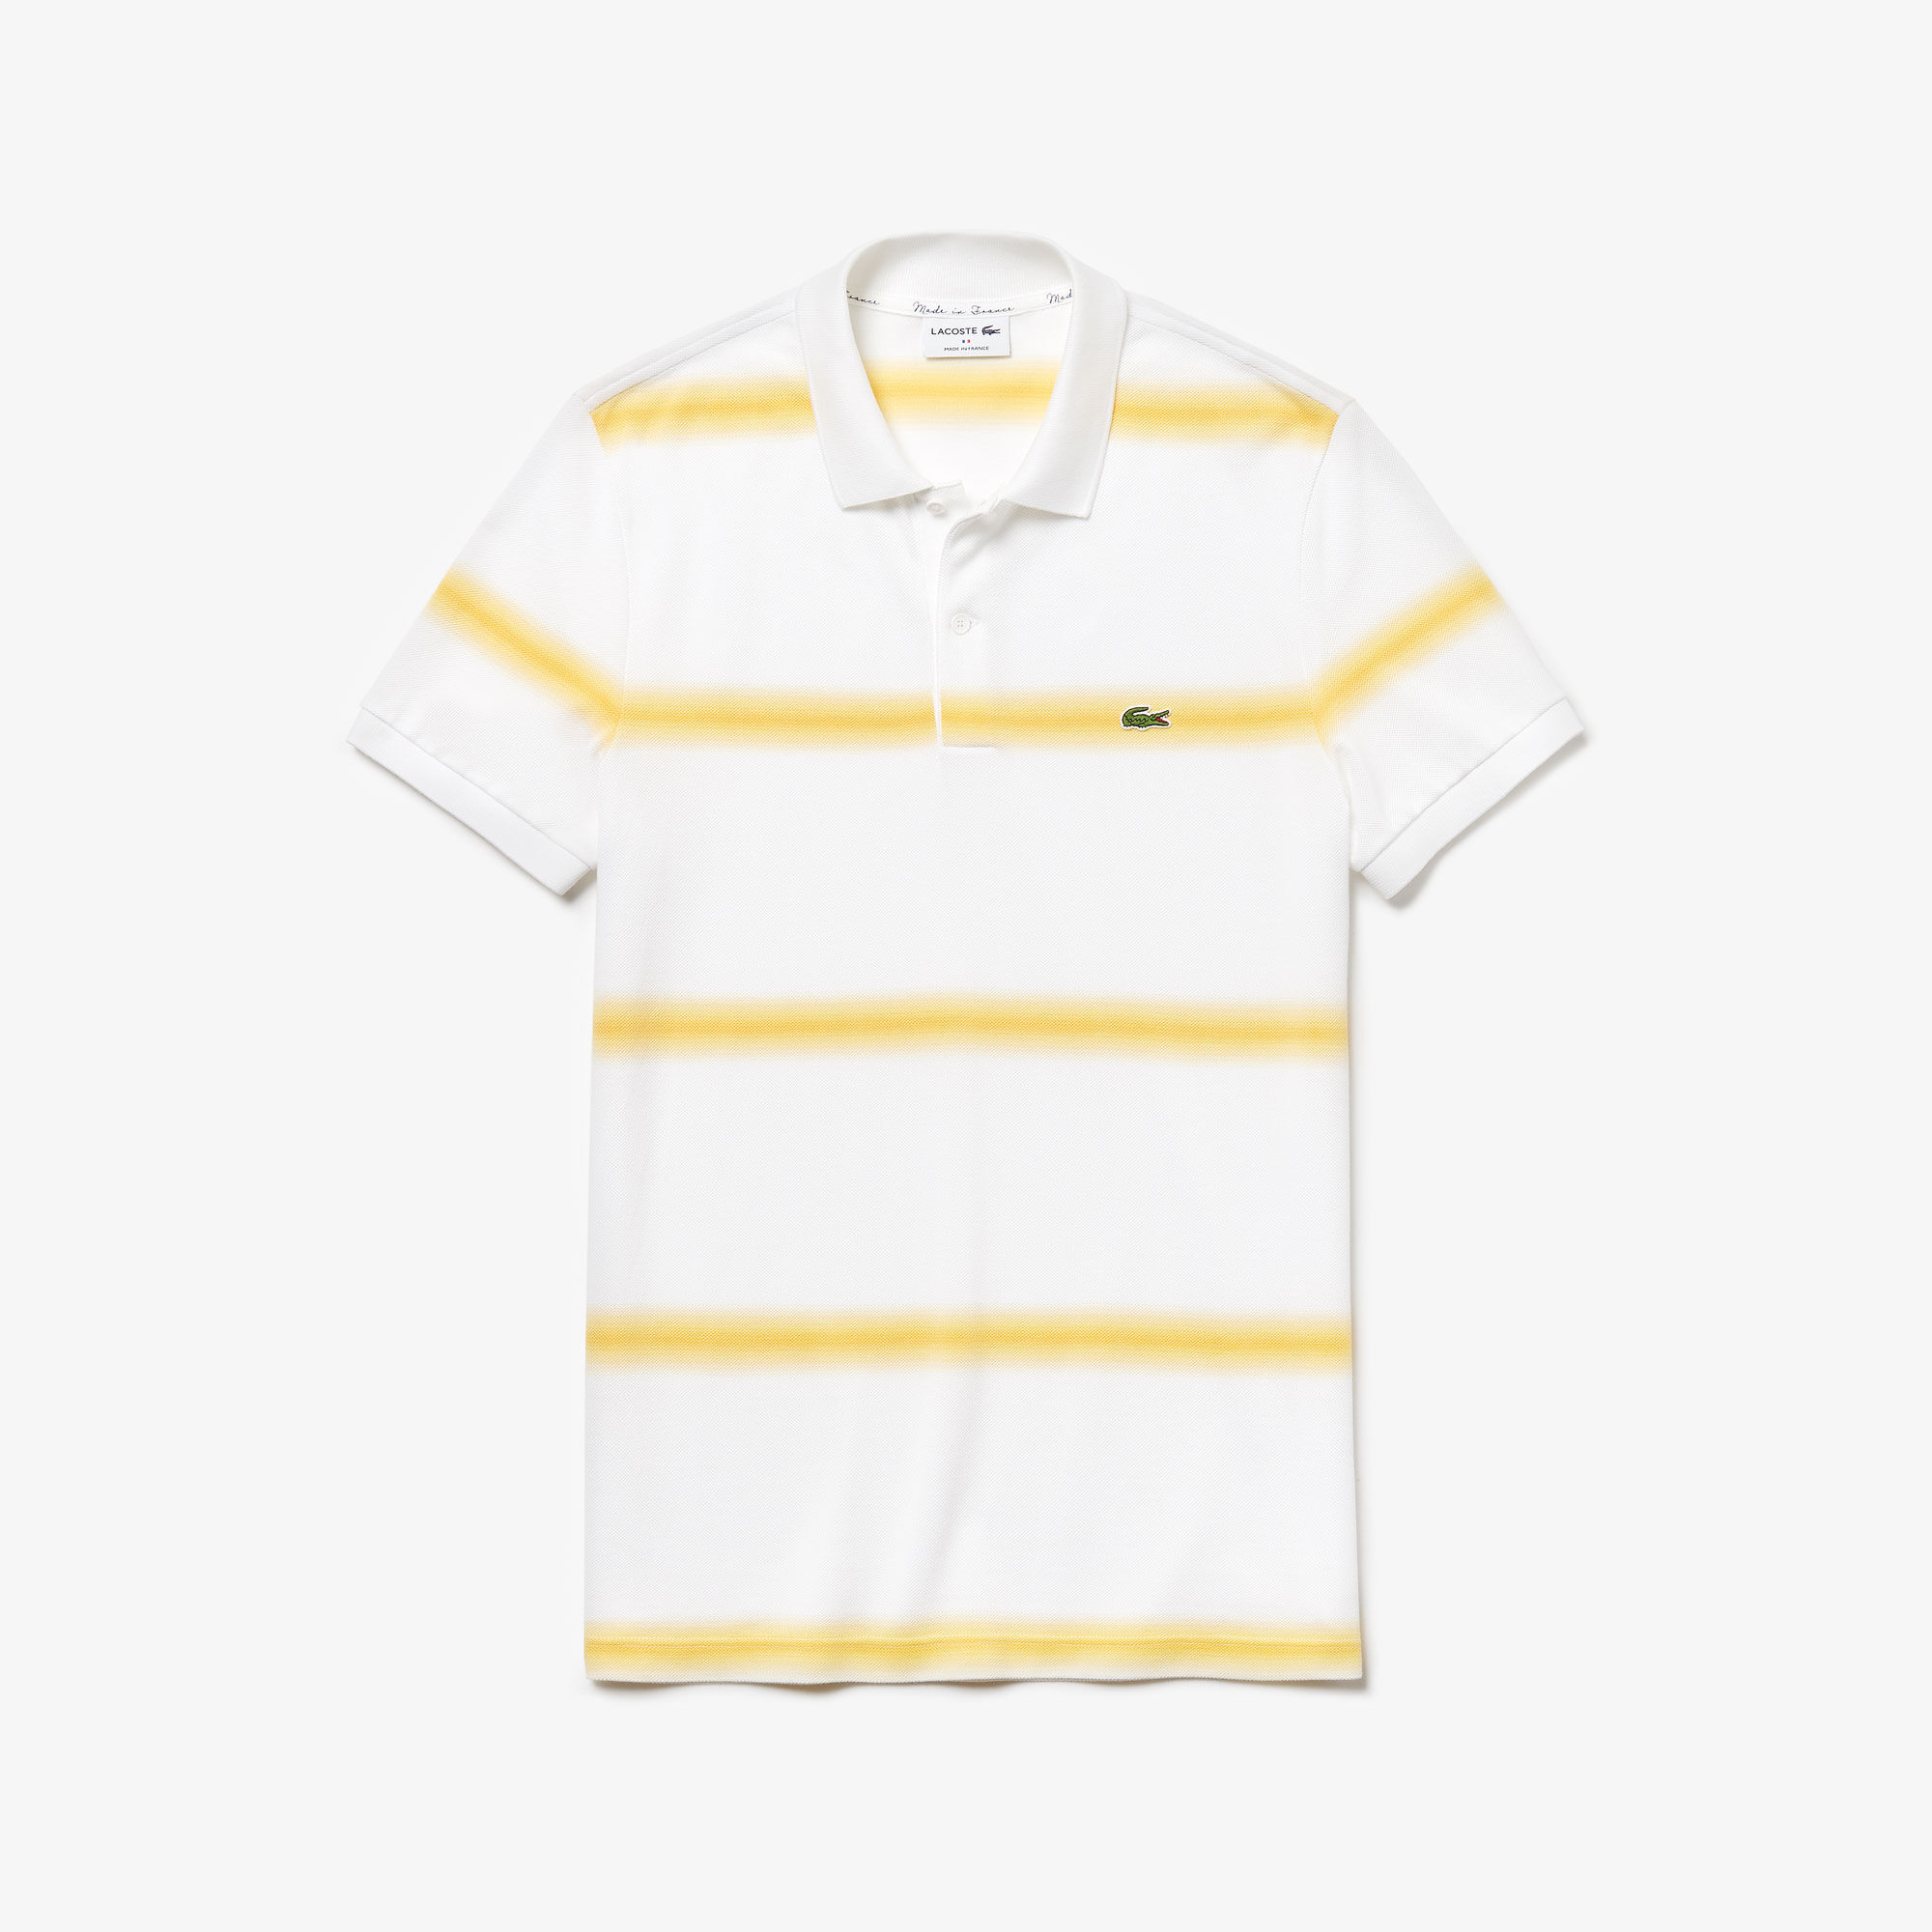 Men's Lacoste Made in France Regular Fit Cotton Piqué Polo Shirt